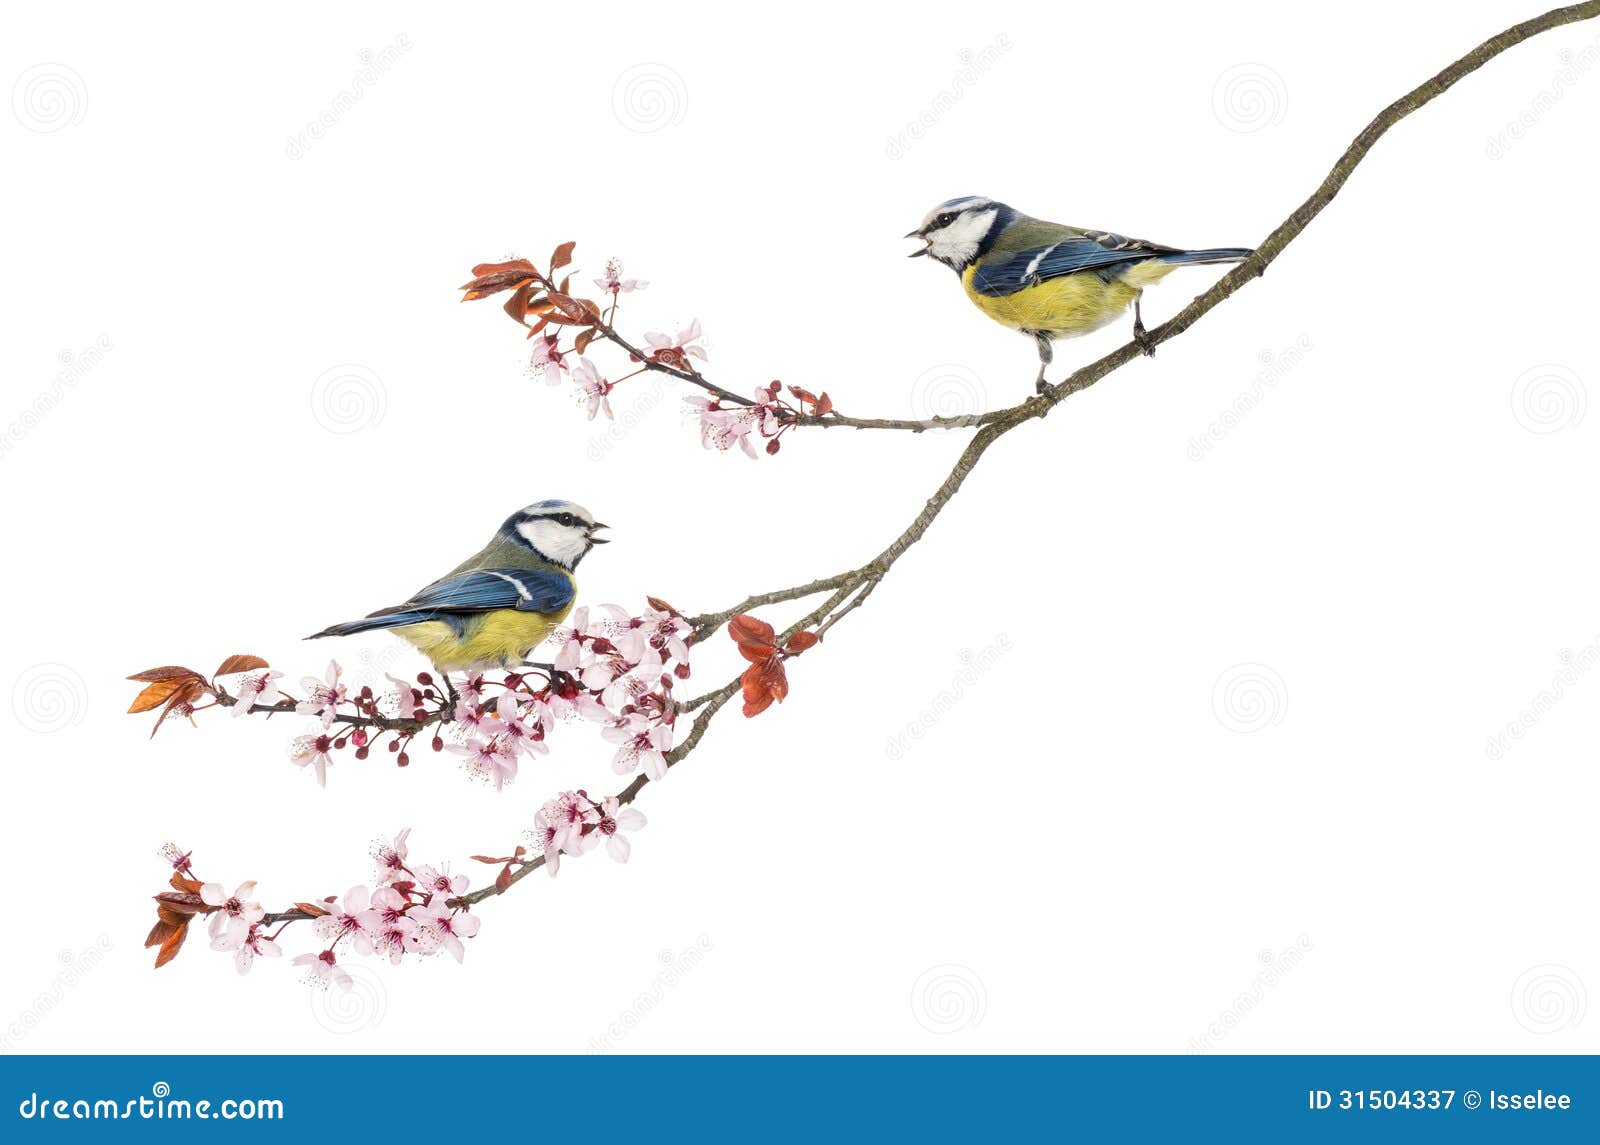 two blue tits whistling on a flowering branch, cyanistes caeruleus